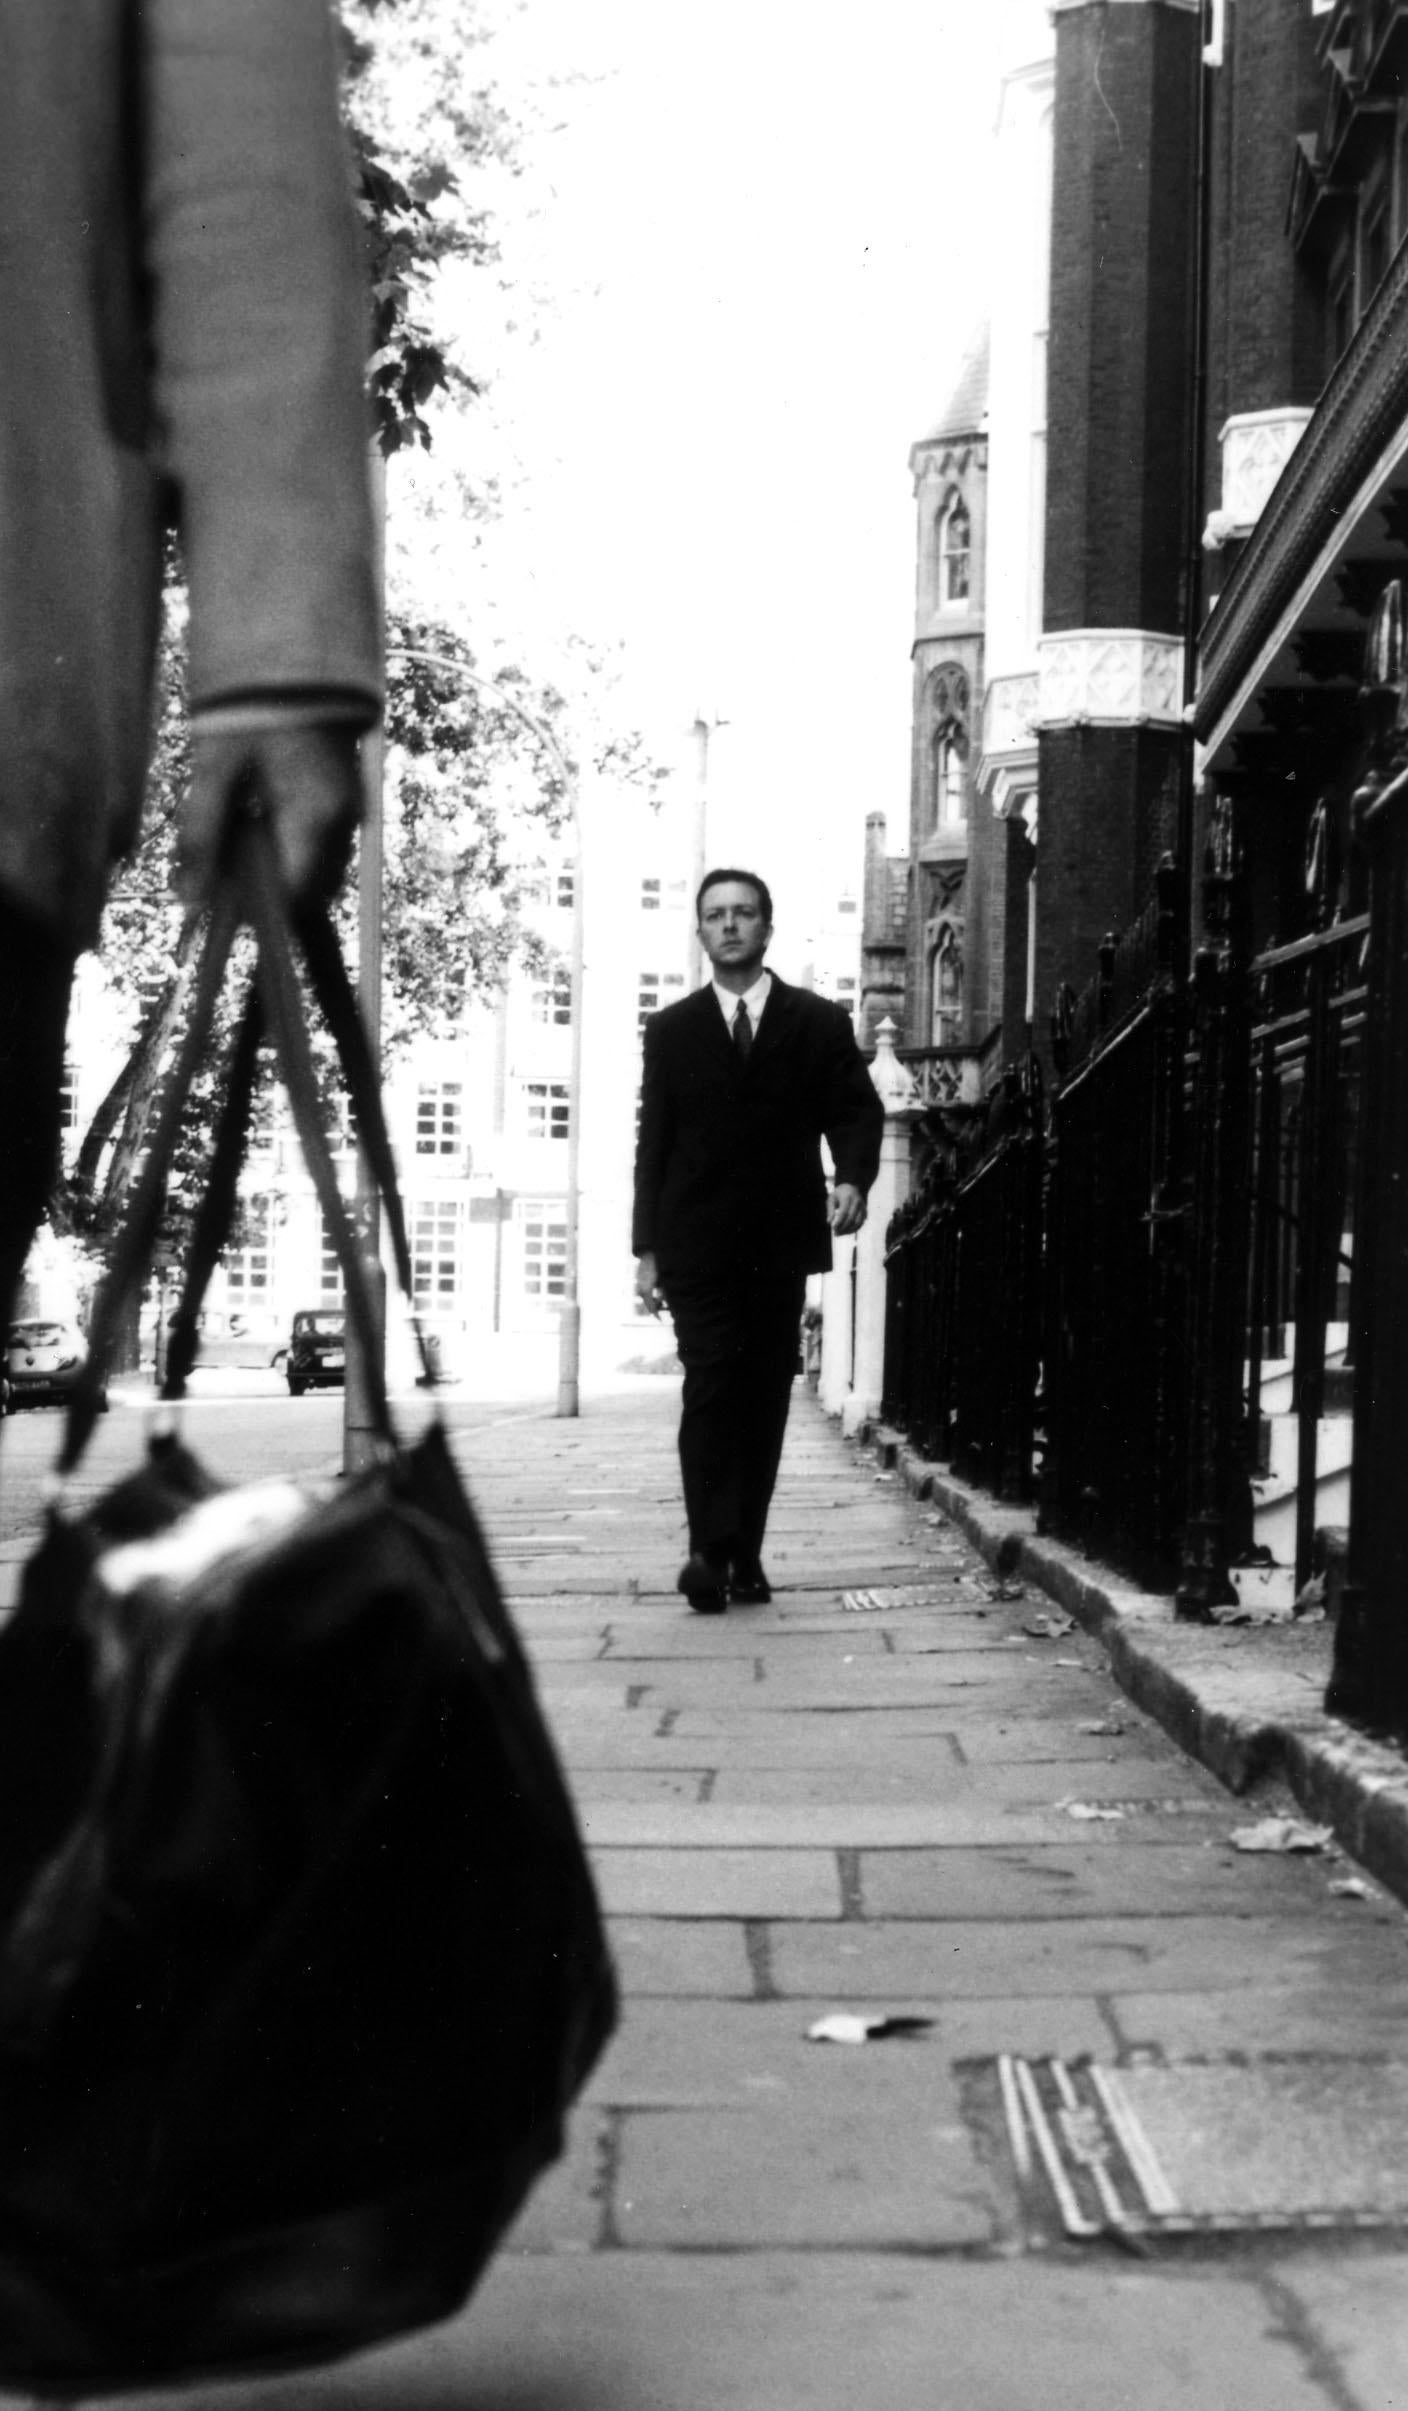 A lone figure walks down the street in the center of an image from the movie Following.